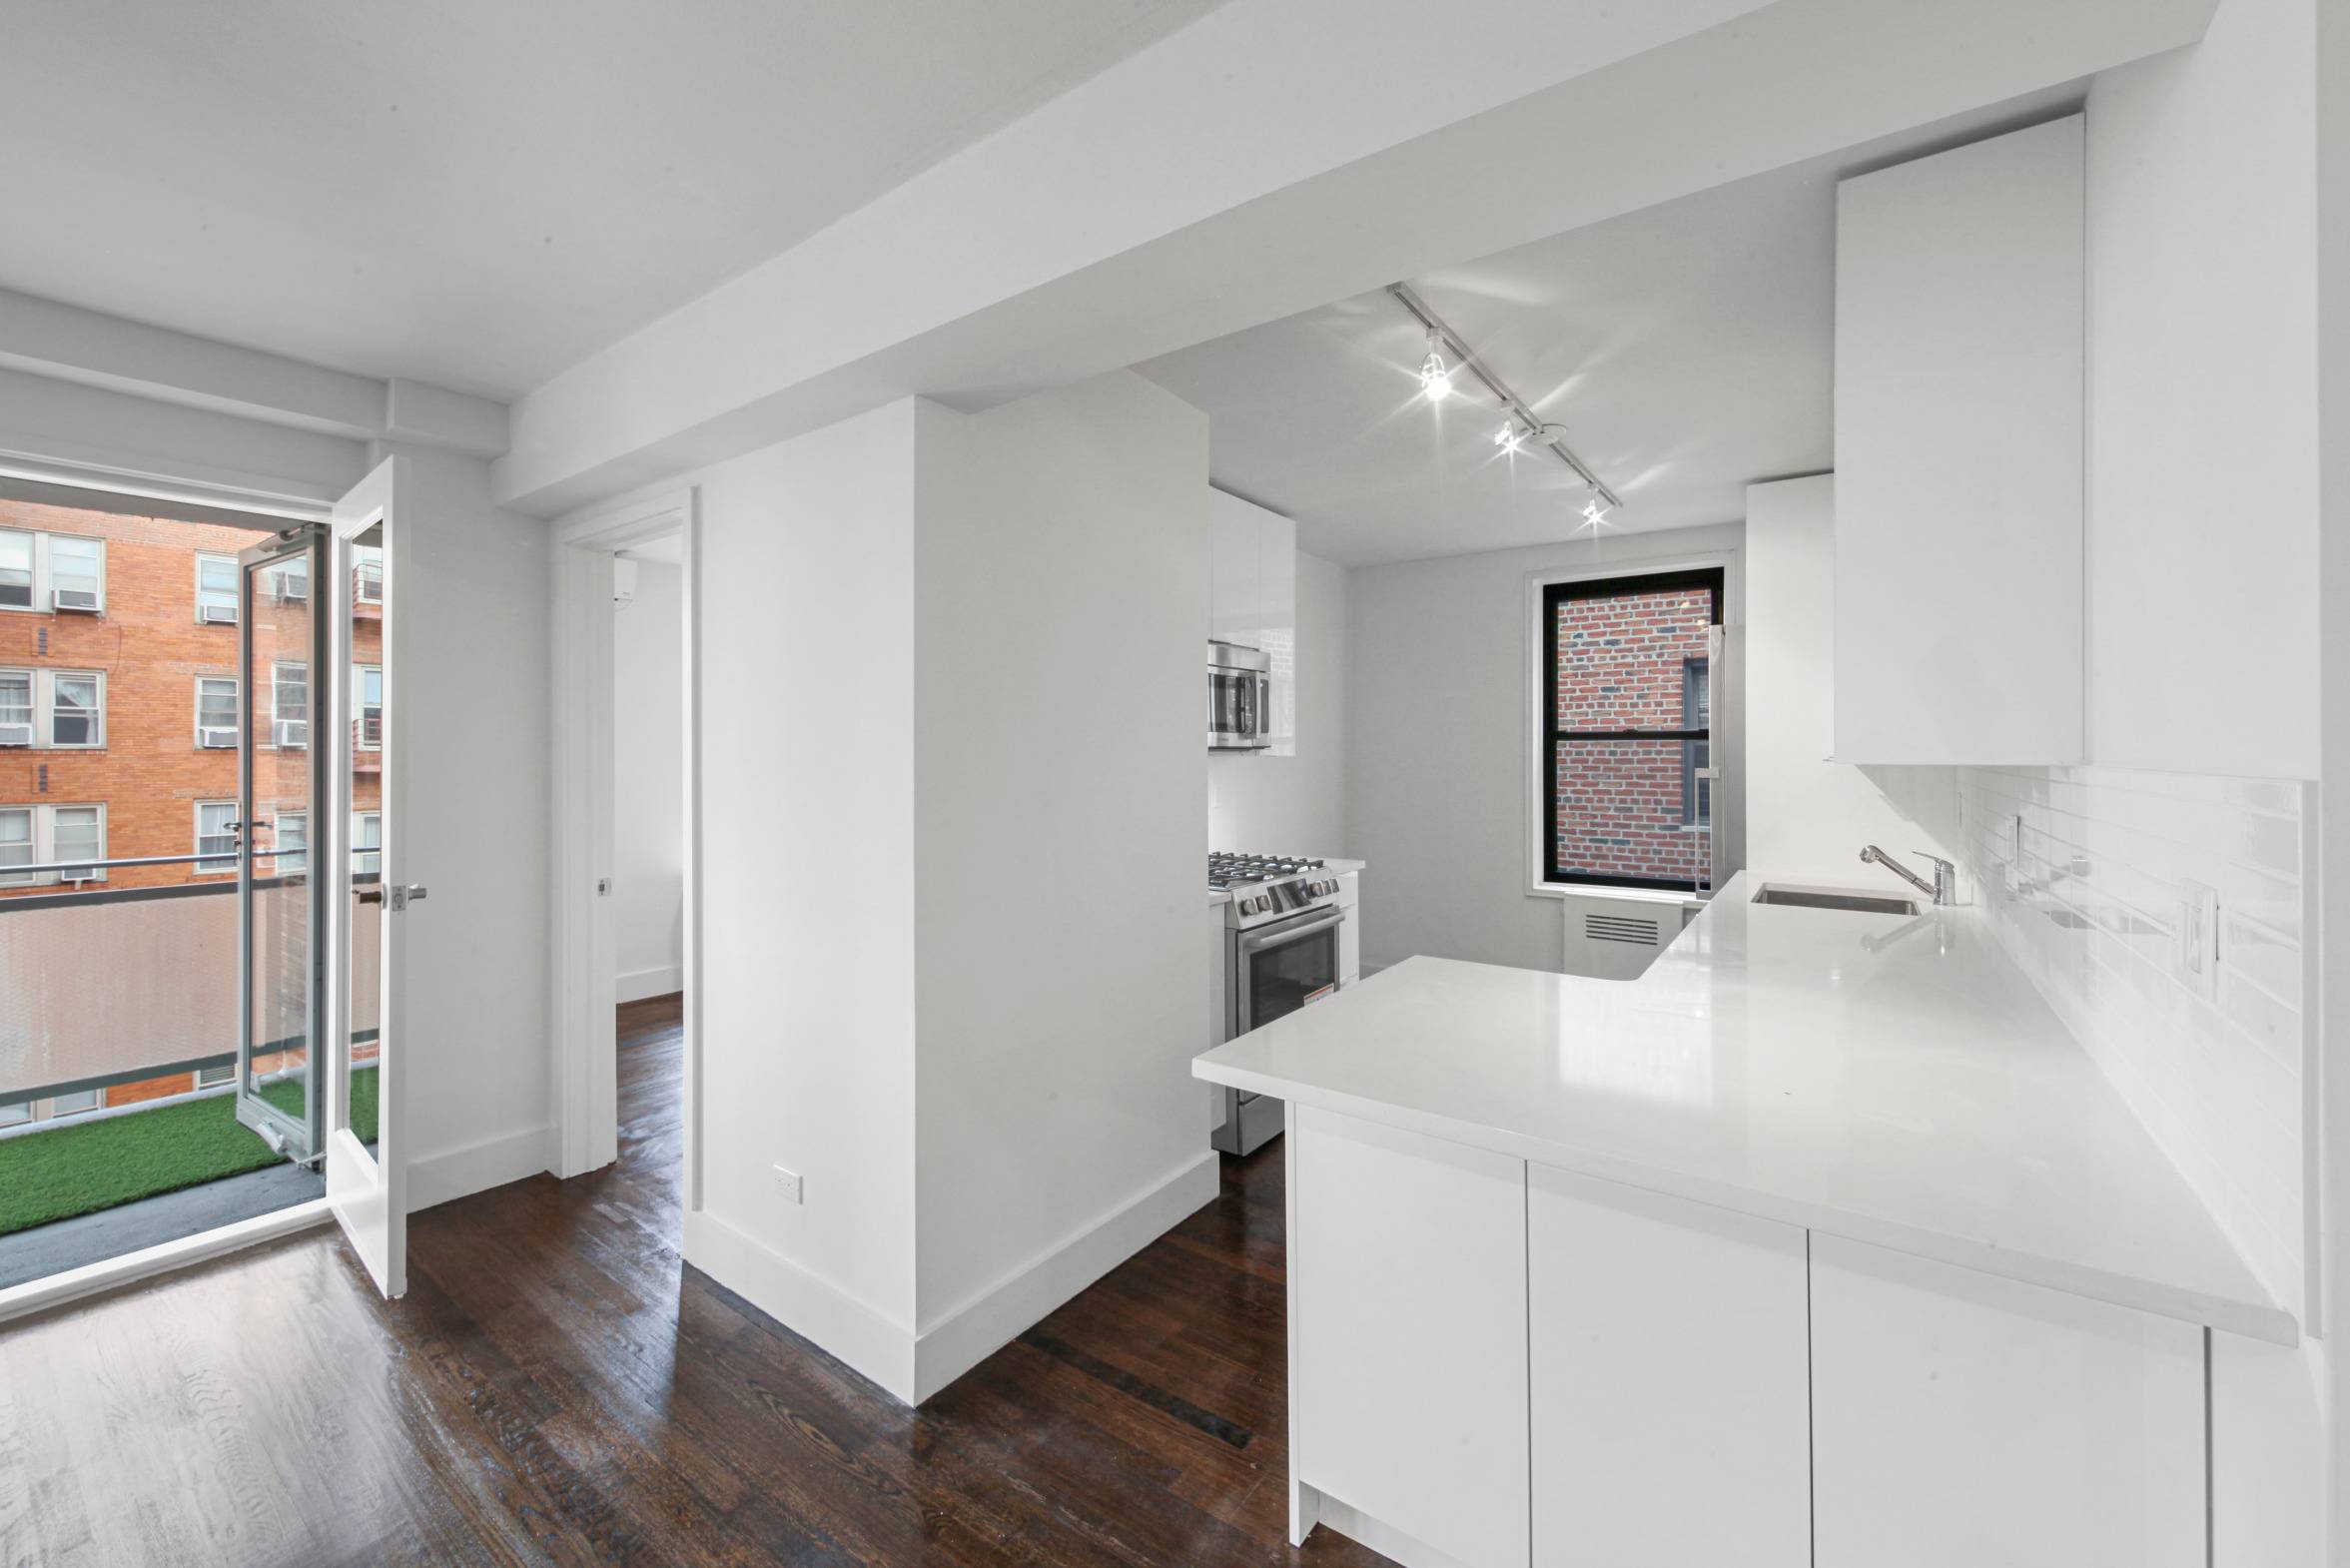 Classic and modern blissfully unite for this redesigned and magnificently renovated two bedroom, two bathroom with private balcony.